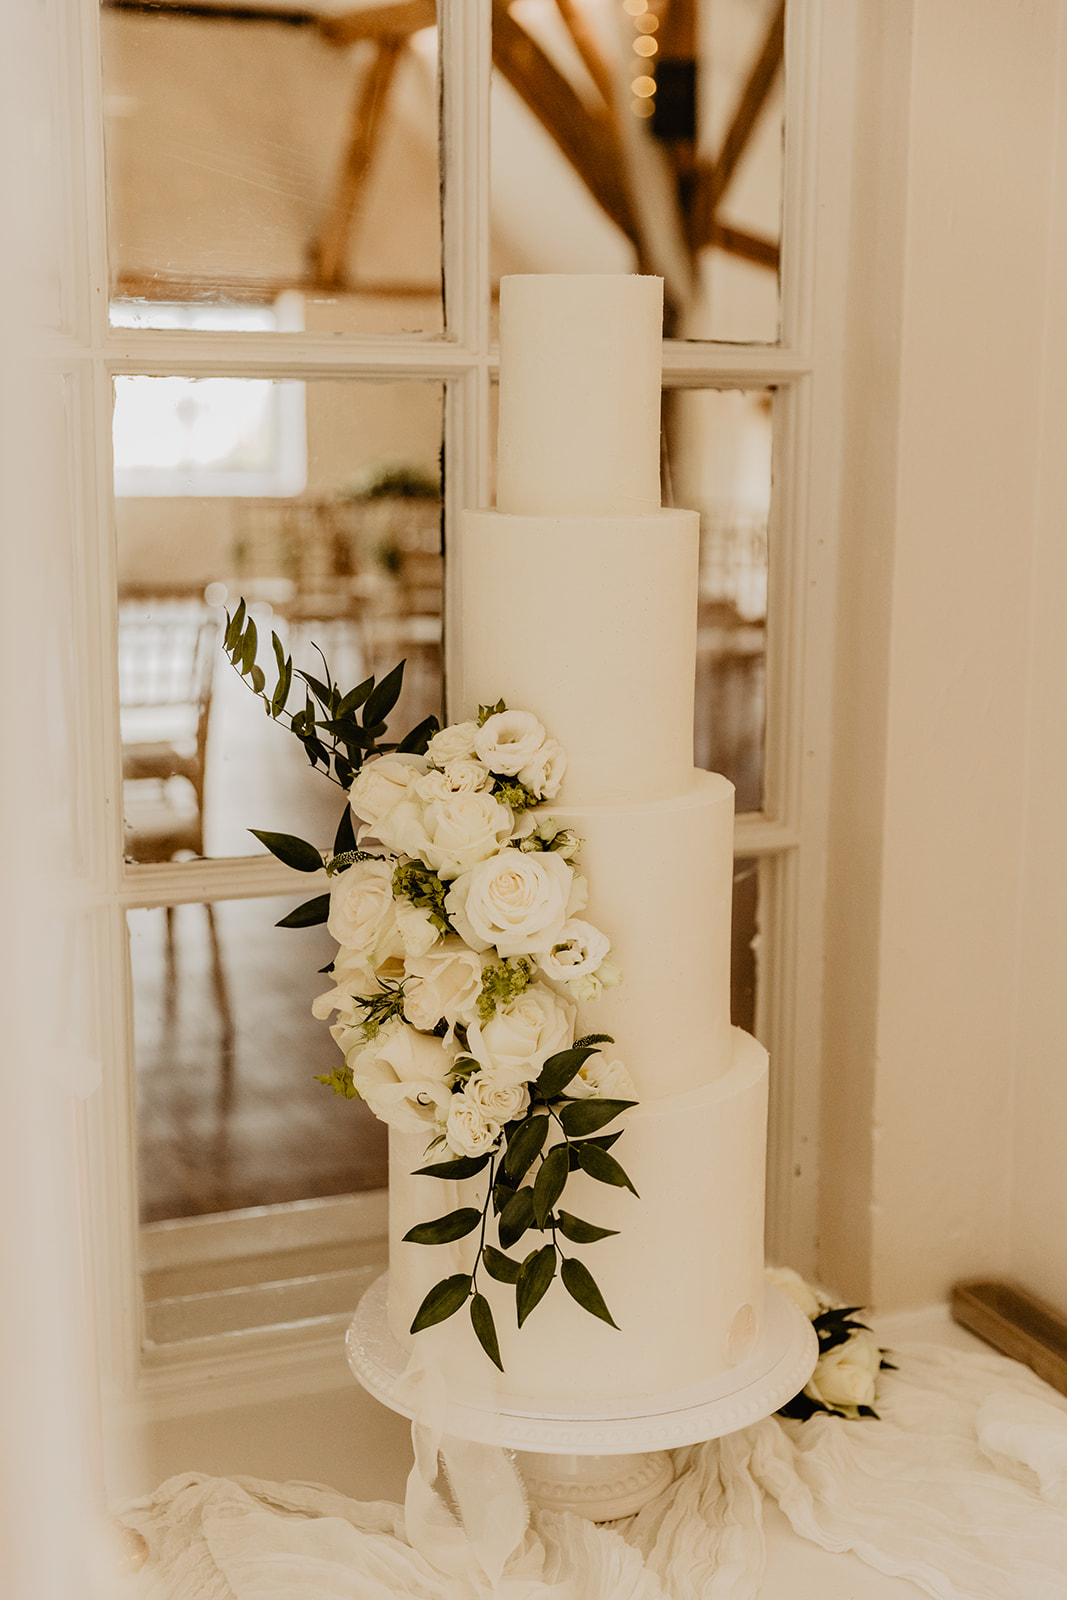 Wedding cake at a Bury Manor Barn Wedding in Sussex. Photographer OliveJoy Photography.